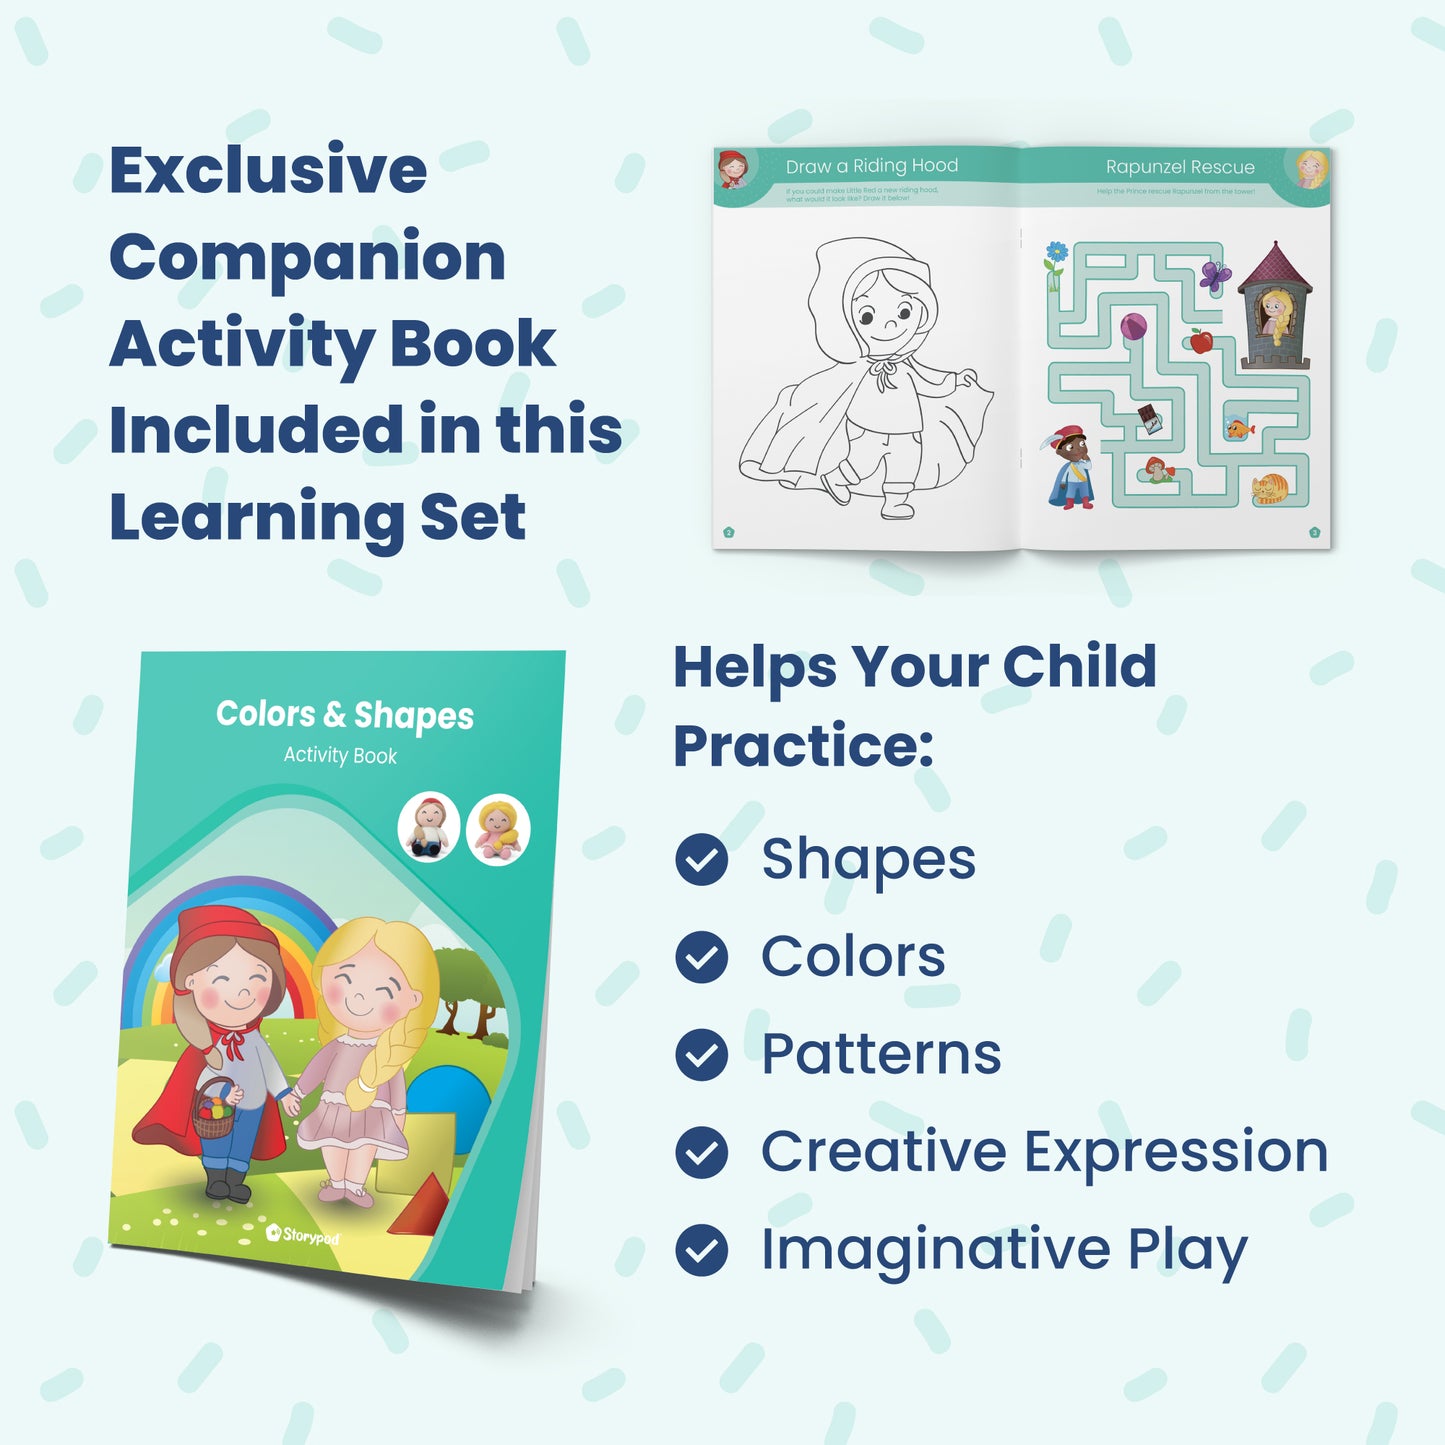 Colors & Shapes Learning Set